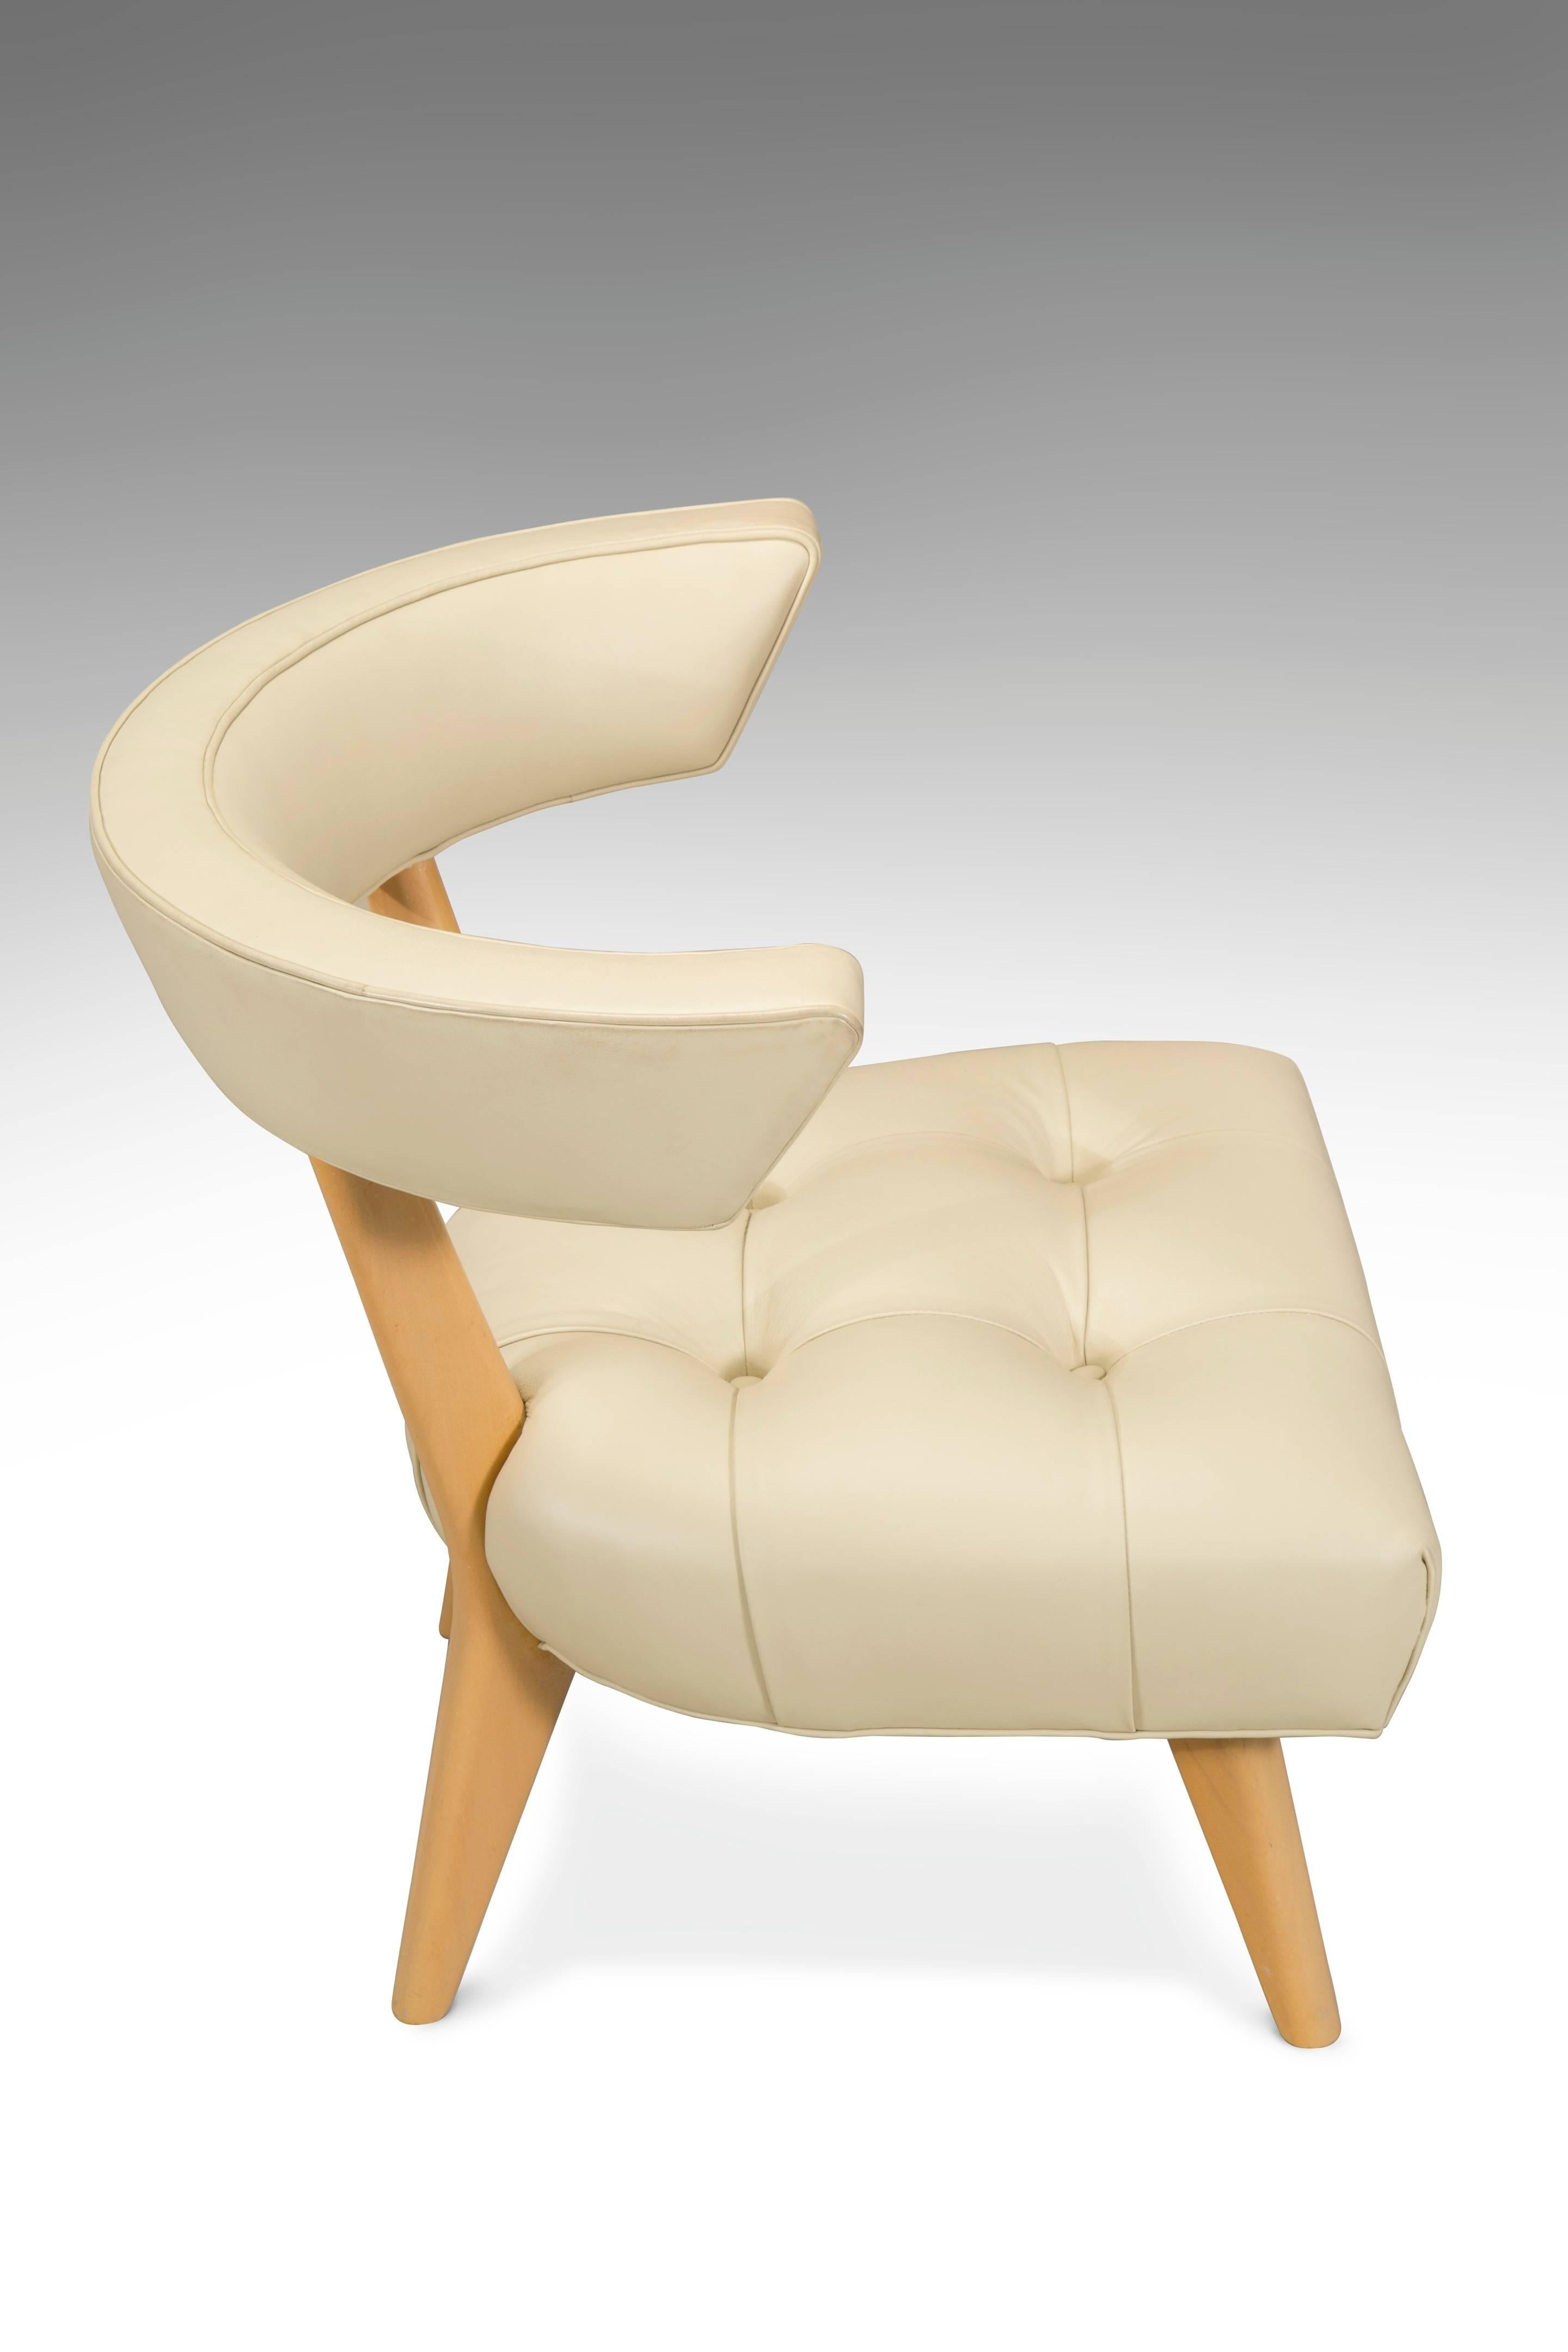 Billy Haines, Pair of Blonde Glazed Wood and Ivory Upholstered Hostess Chairs (Leder) im Angebot